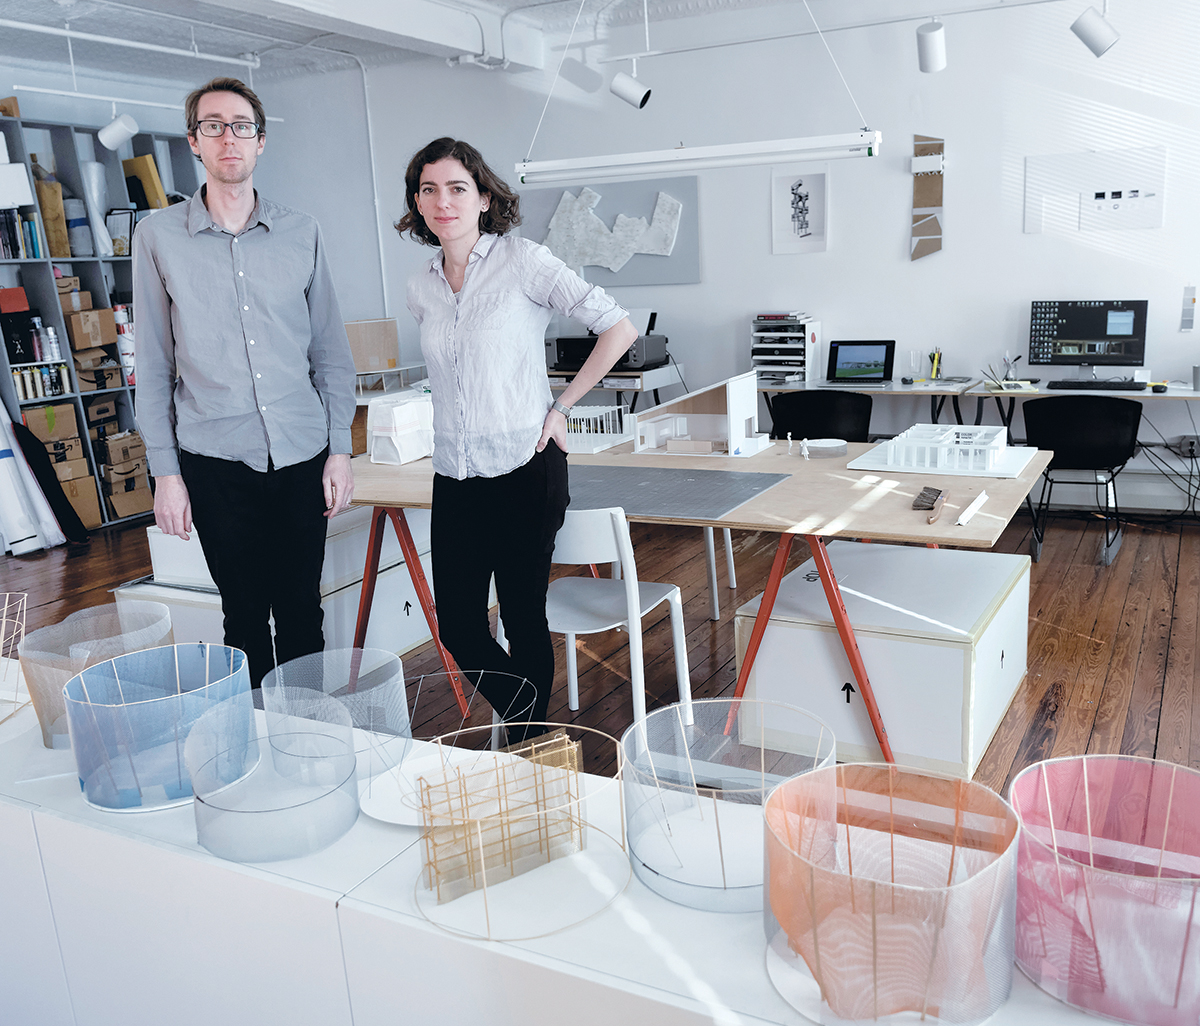 ACCLAIMED ARCHITECTURE: Aaron Forrest and Yasmin Vobis are the founders of Ultramoderne LLC, a Providence architectural firm that has recently won acclaim for one of its projects, a kiosk station called Chicago Horizon in Chicago. / PBN PHOTO/MICHAEL SALERNO